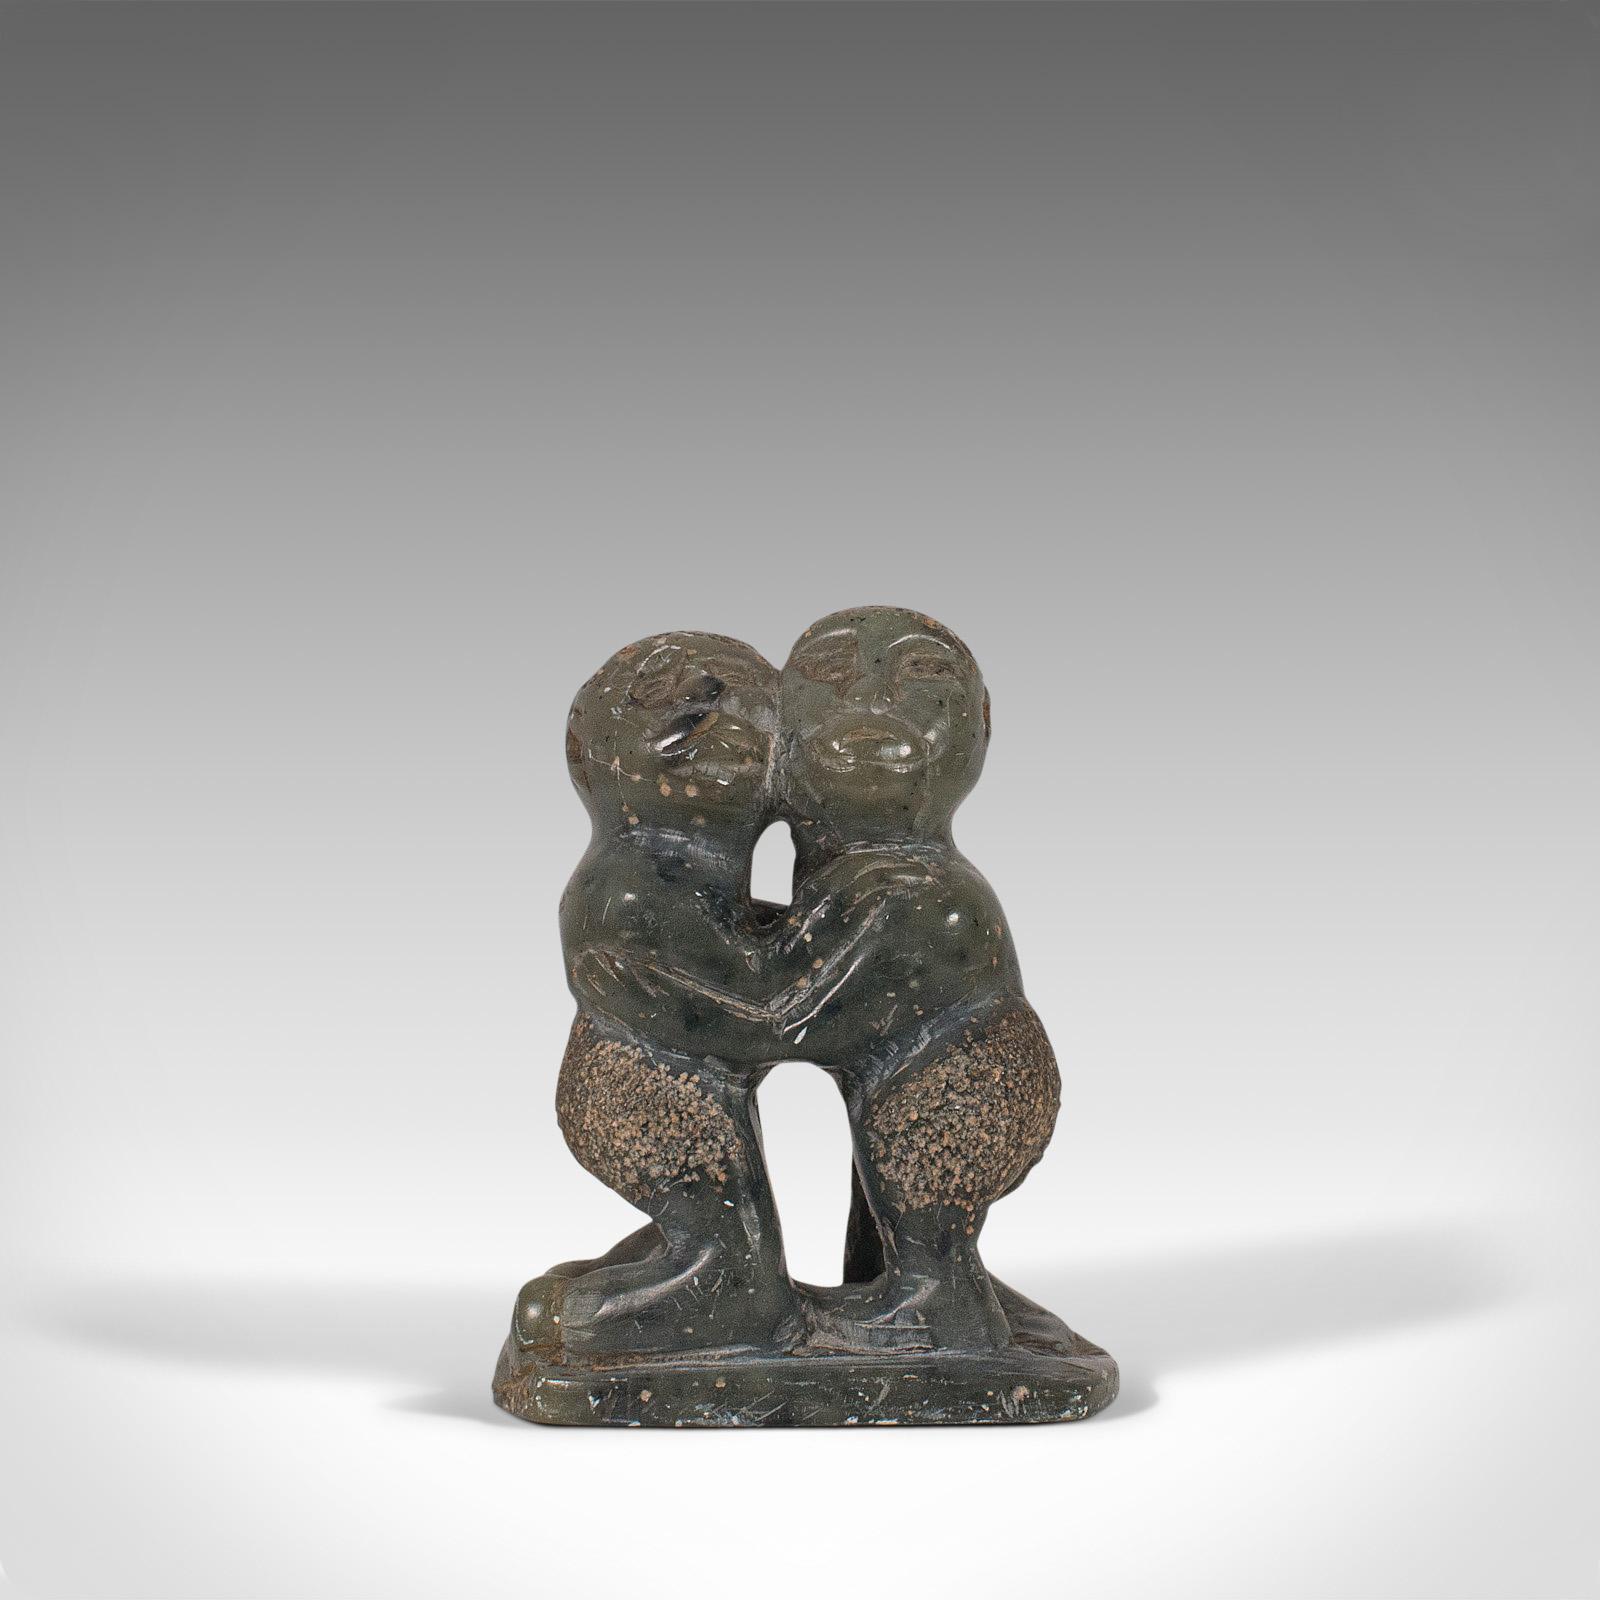 This is a small antique tribal figure. A Polynesian, decorative soapstone statue of two boys in an embrace, dating to the late 19th century, circa 1900.

Naive appeal to this small, fascinating piece
Displays a desirable aged patina - minimal